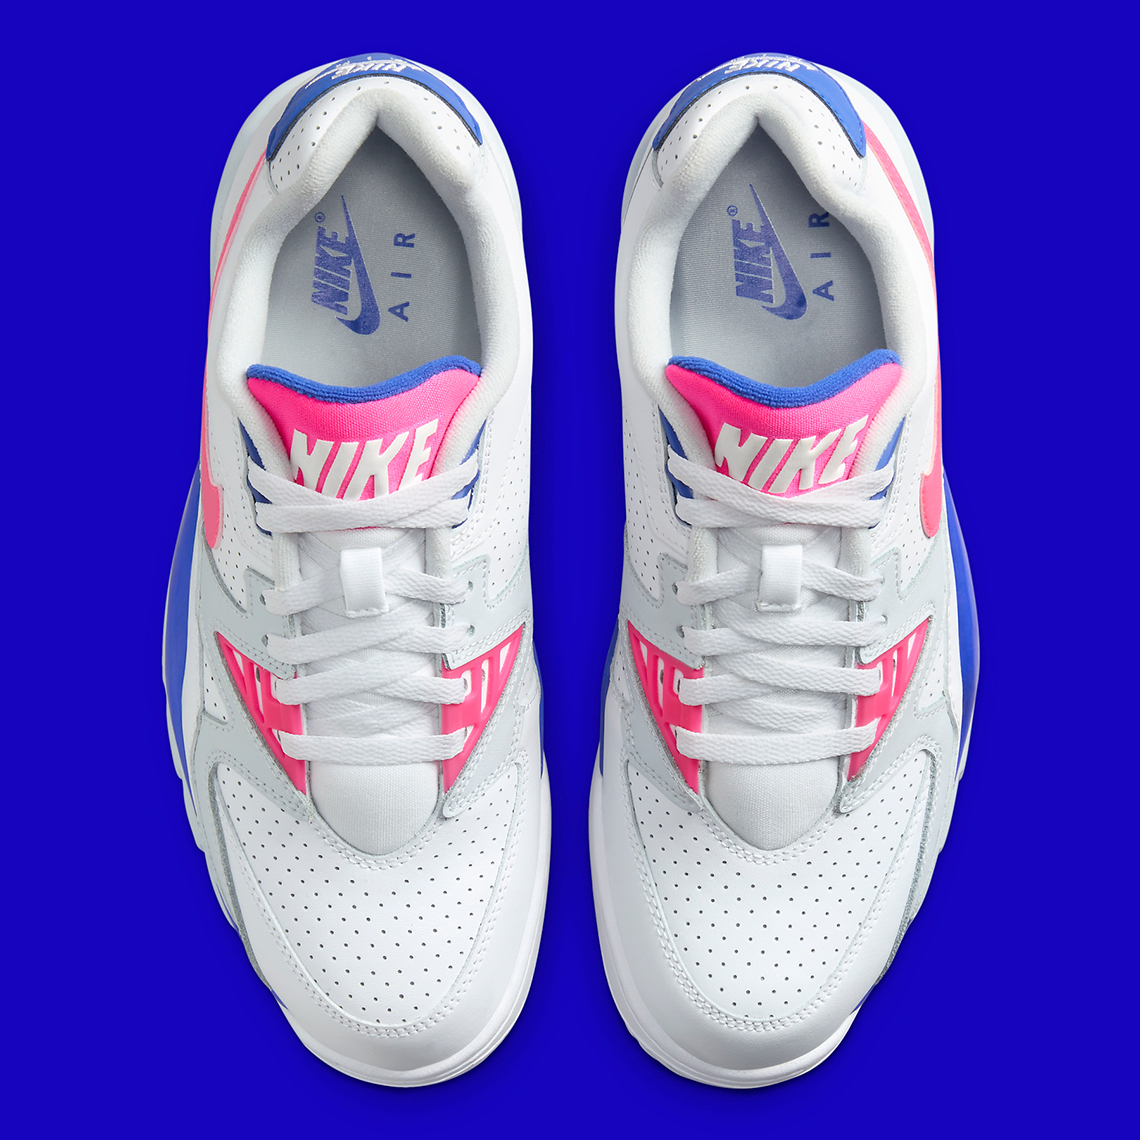 nike cross trainer low white concord pink fn6887 100 7